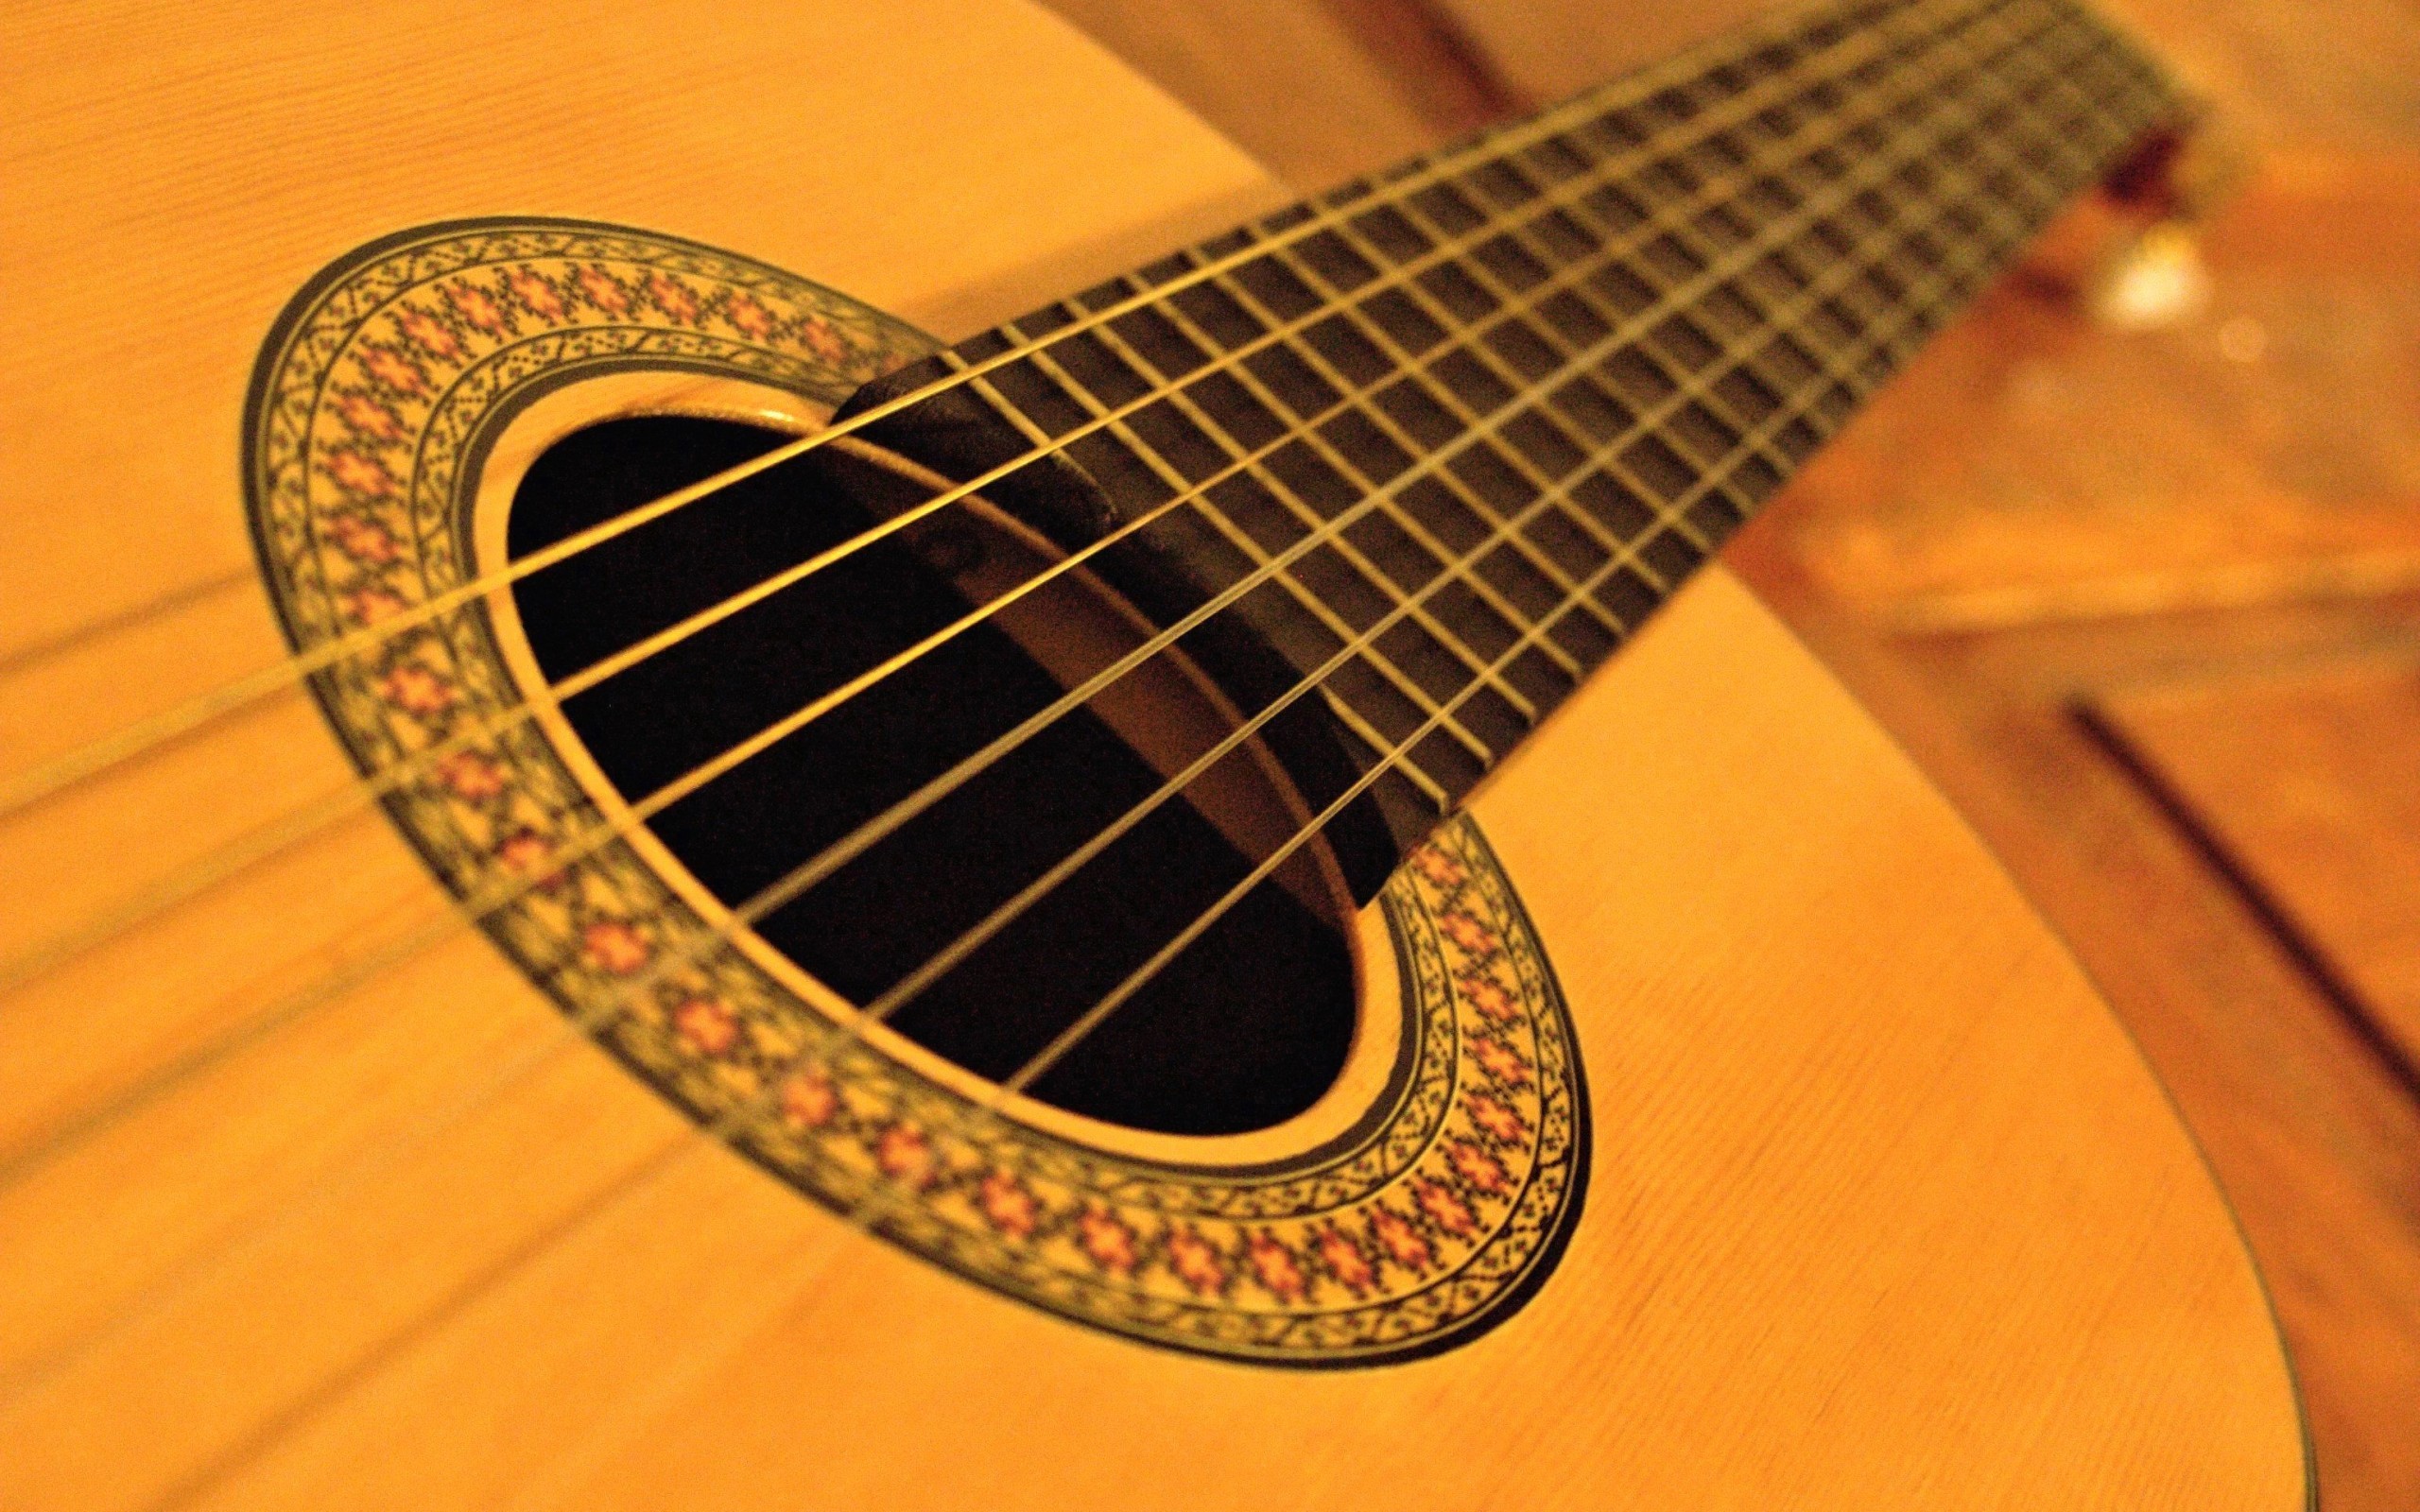 2560x1600 Collection of Classical Guitar Wallpaper on HDWallpapers